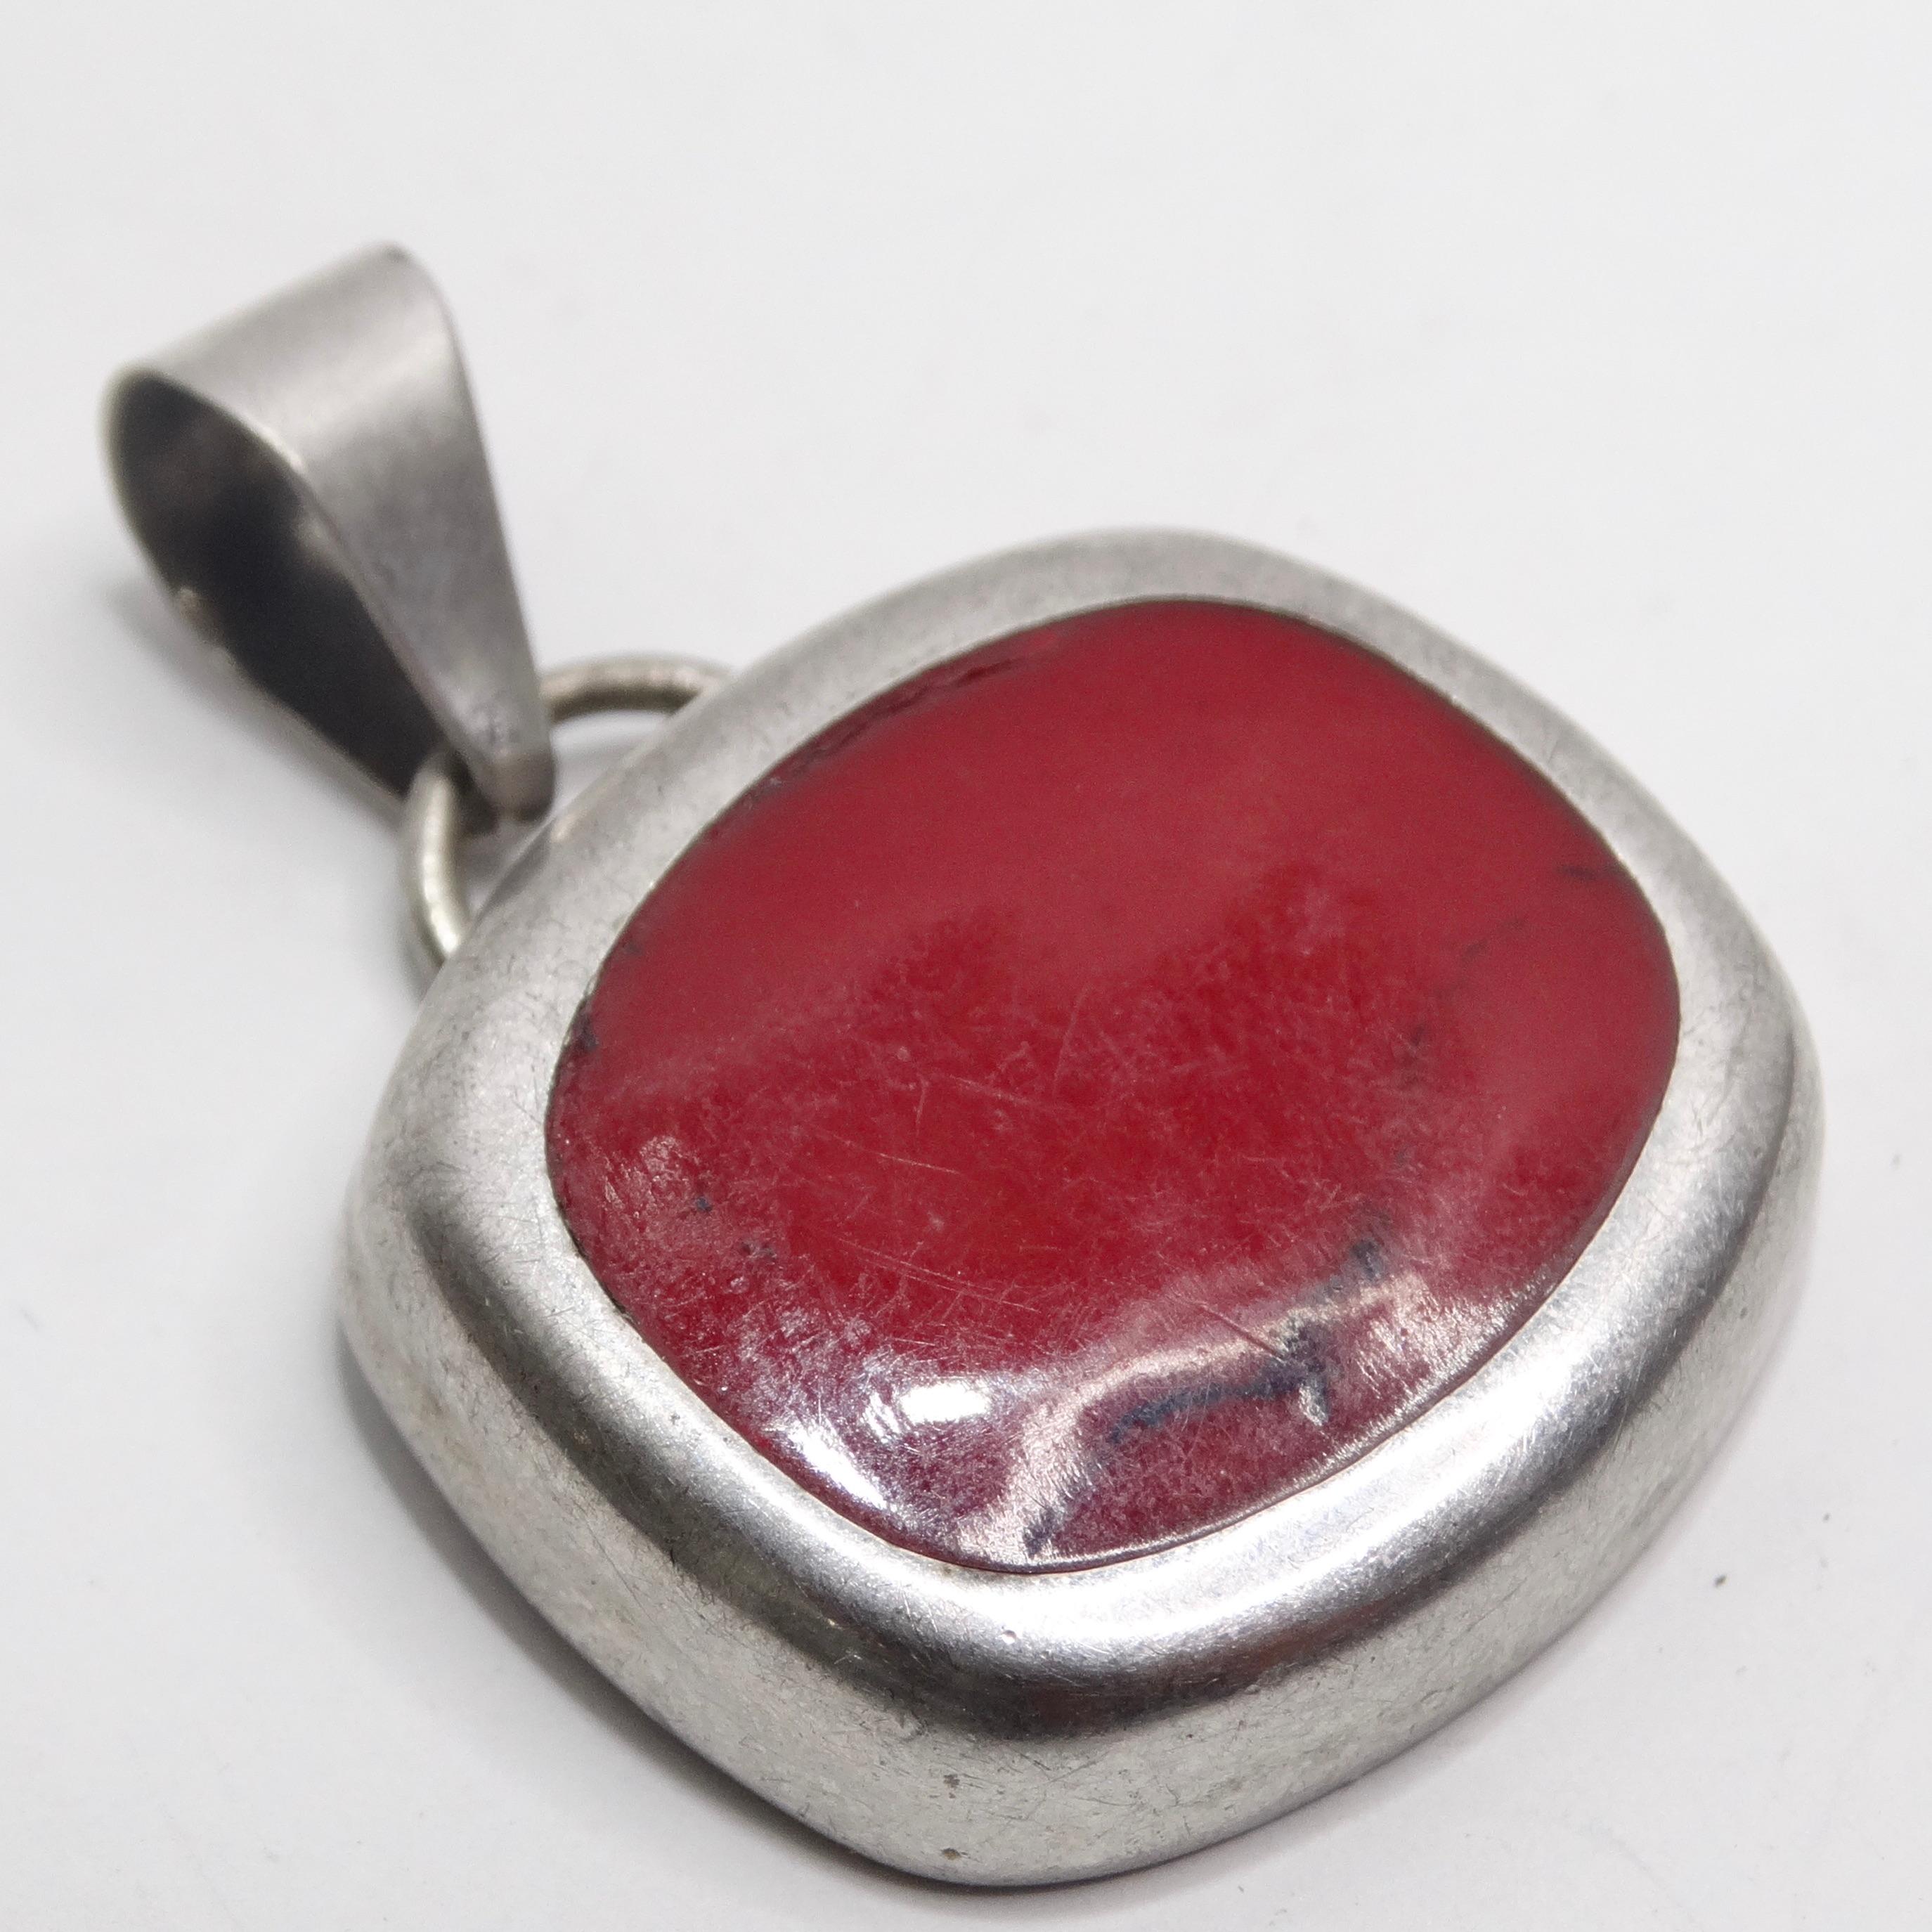 Introducing the 1970s Silver Native American Strong Red Carnelian Stone Pendant—a timeless piece that seamlessly blends the craftsmanship of Native American jewelry with a versatile pop of color. This pendant isn't just an accessory; it's a wearable